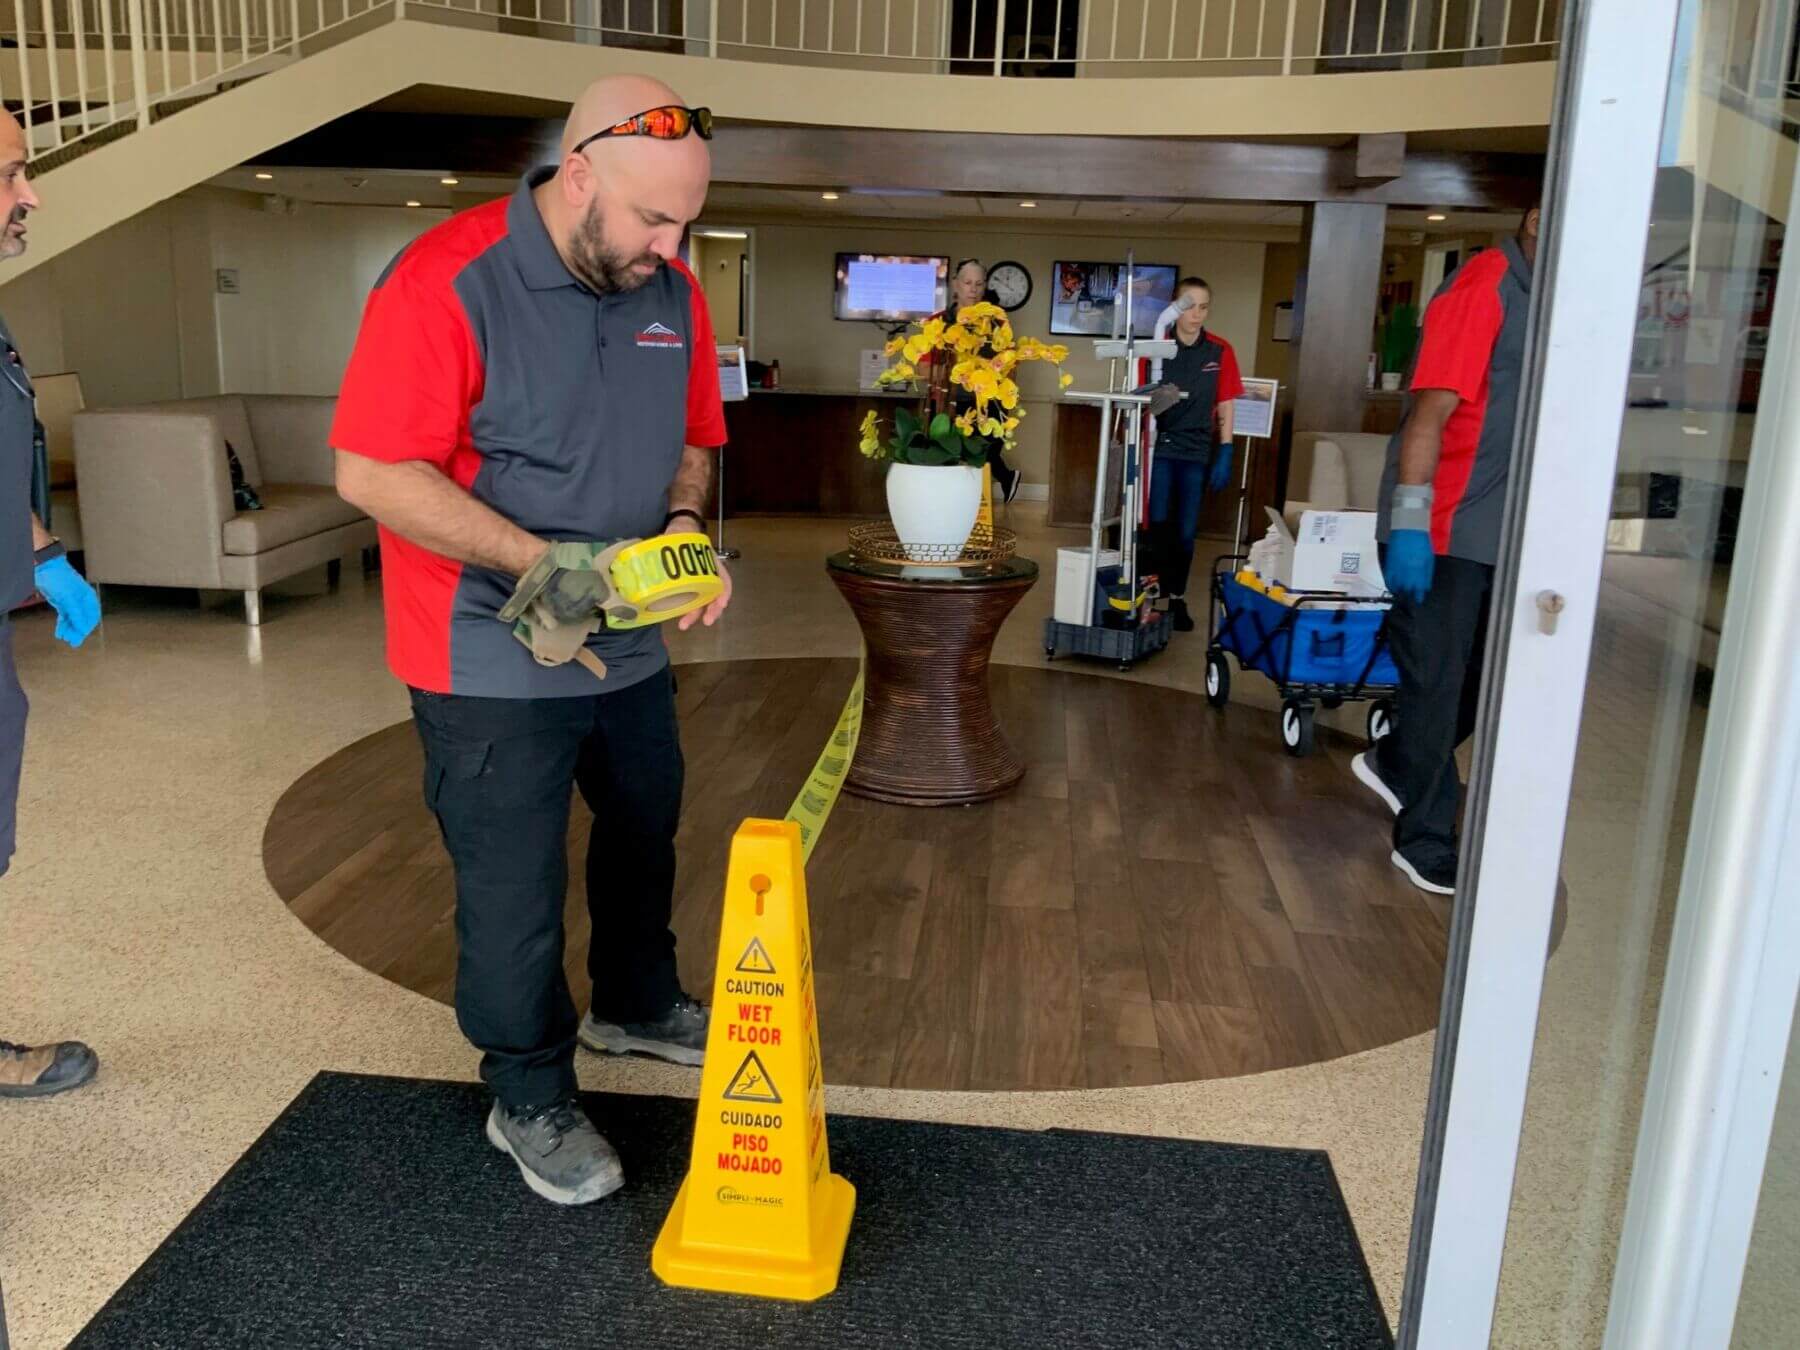 Commercial Hotel Cleaning Service, Hotel Cleaning Services, Outsourced Hotel Cleaning Services, Commercial Hotel Cleaning